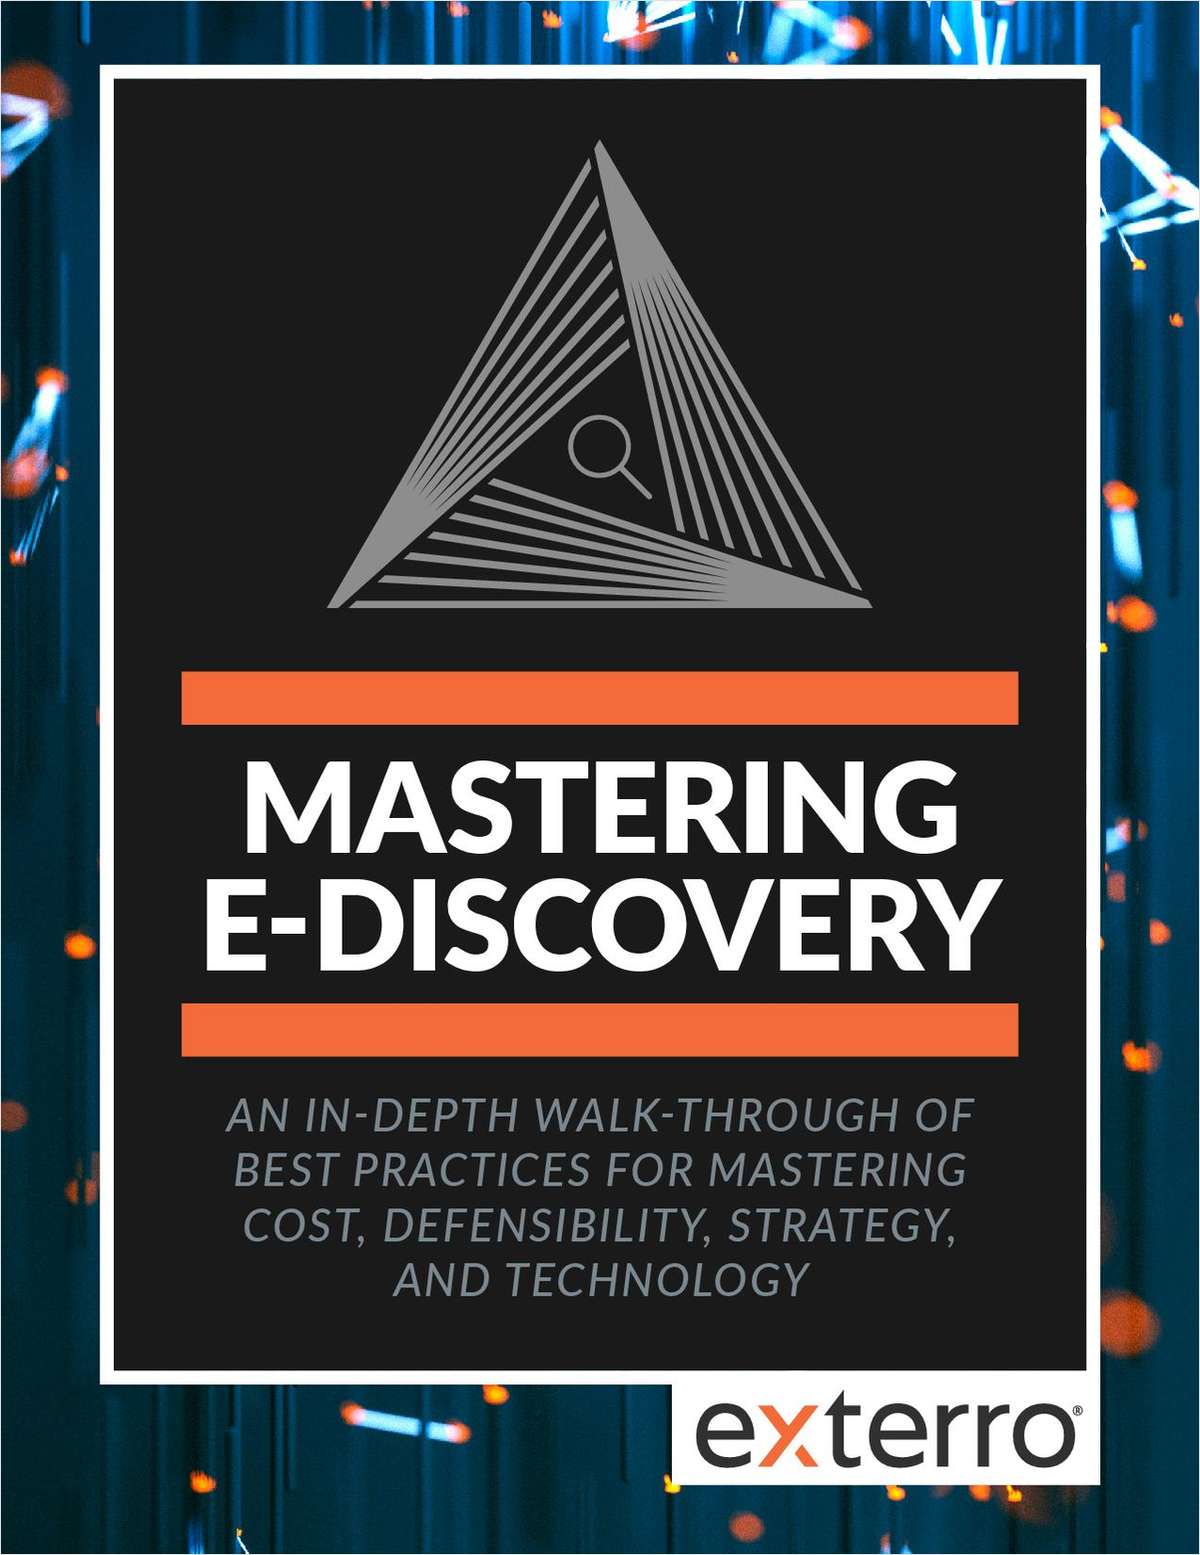 Attorneys around the world are attempting to establish and maintain a top-notch process for finding and processing data for litigation. This guide reveals best practices and tips from those who are most involved in the e-discovery process and covers key areas that law firms will want to consider to become masters of e-discovery.